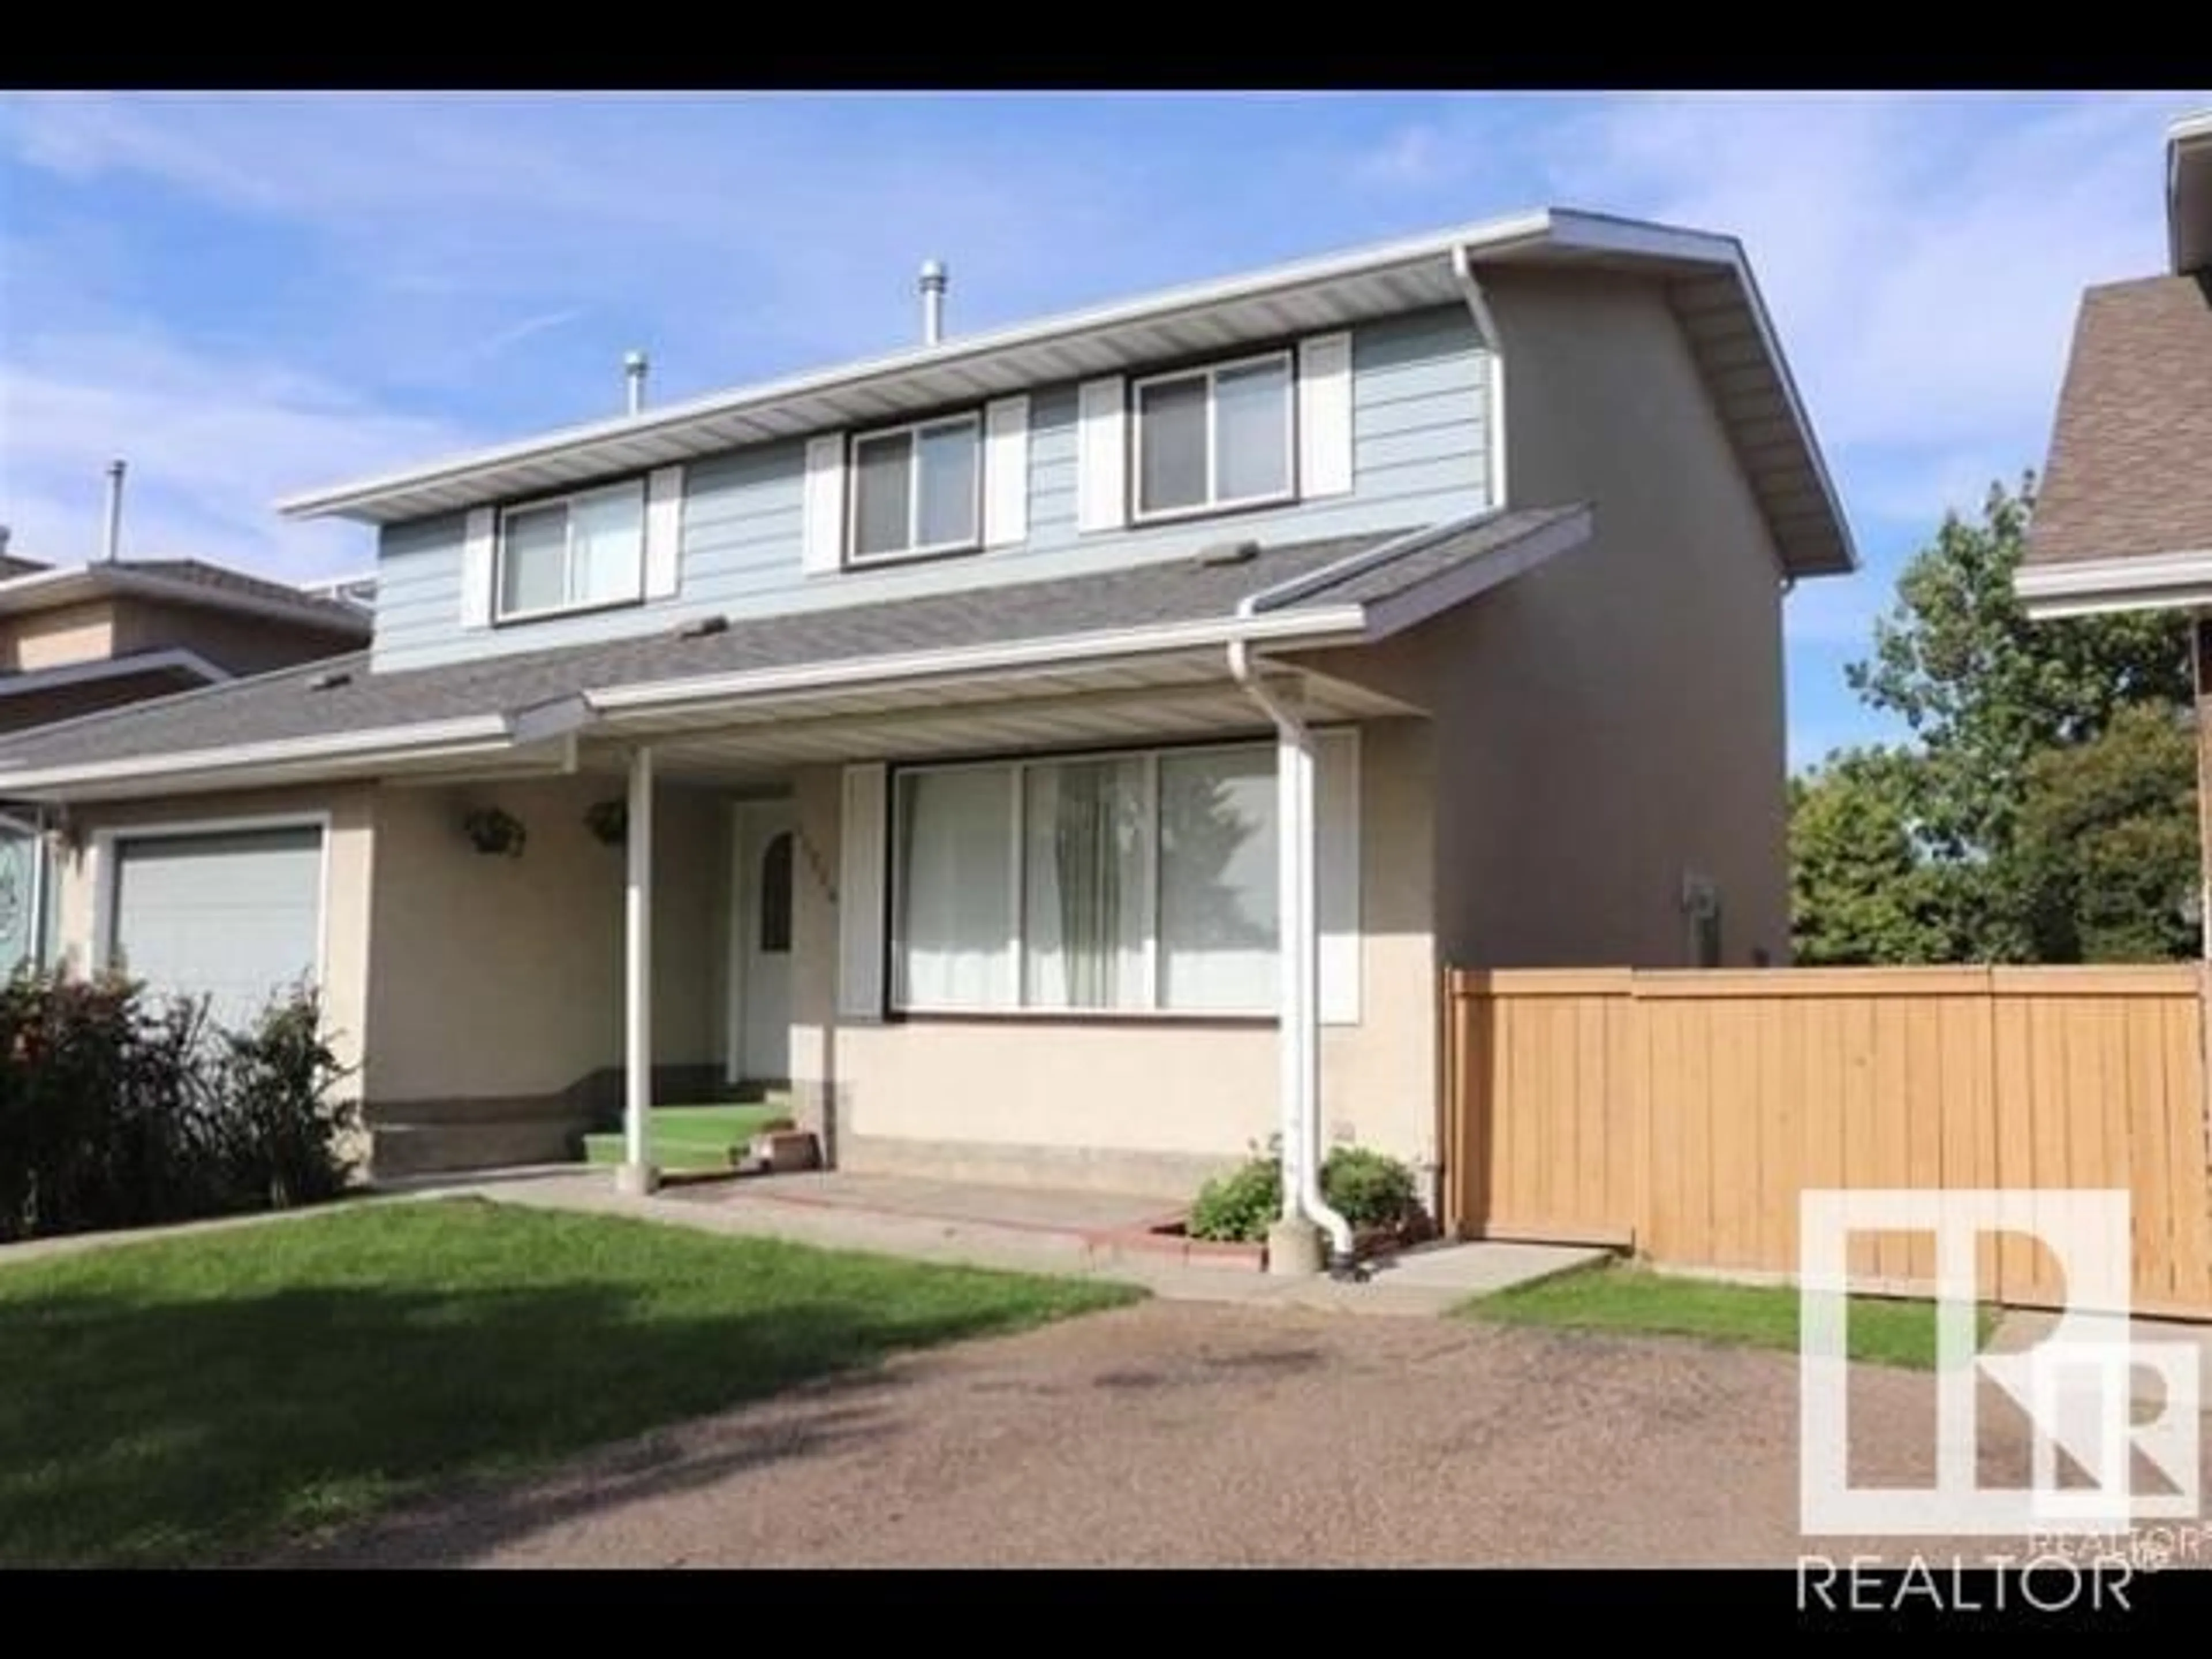 A pic from exterior of the house or condo for 16214 109 ST NW, Edmonton Alberta T5X2P9